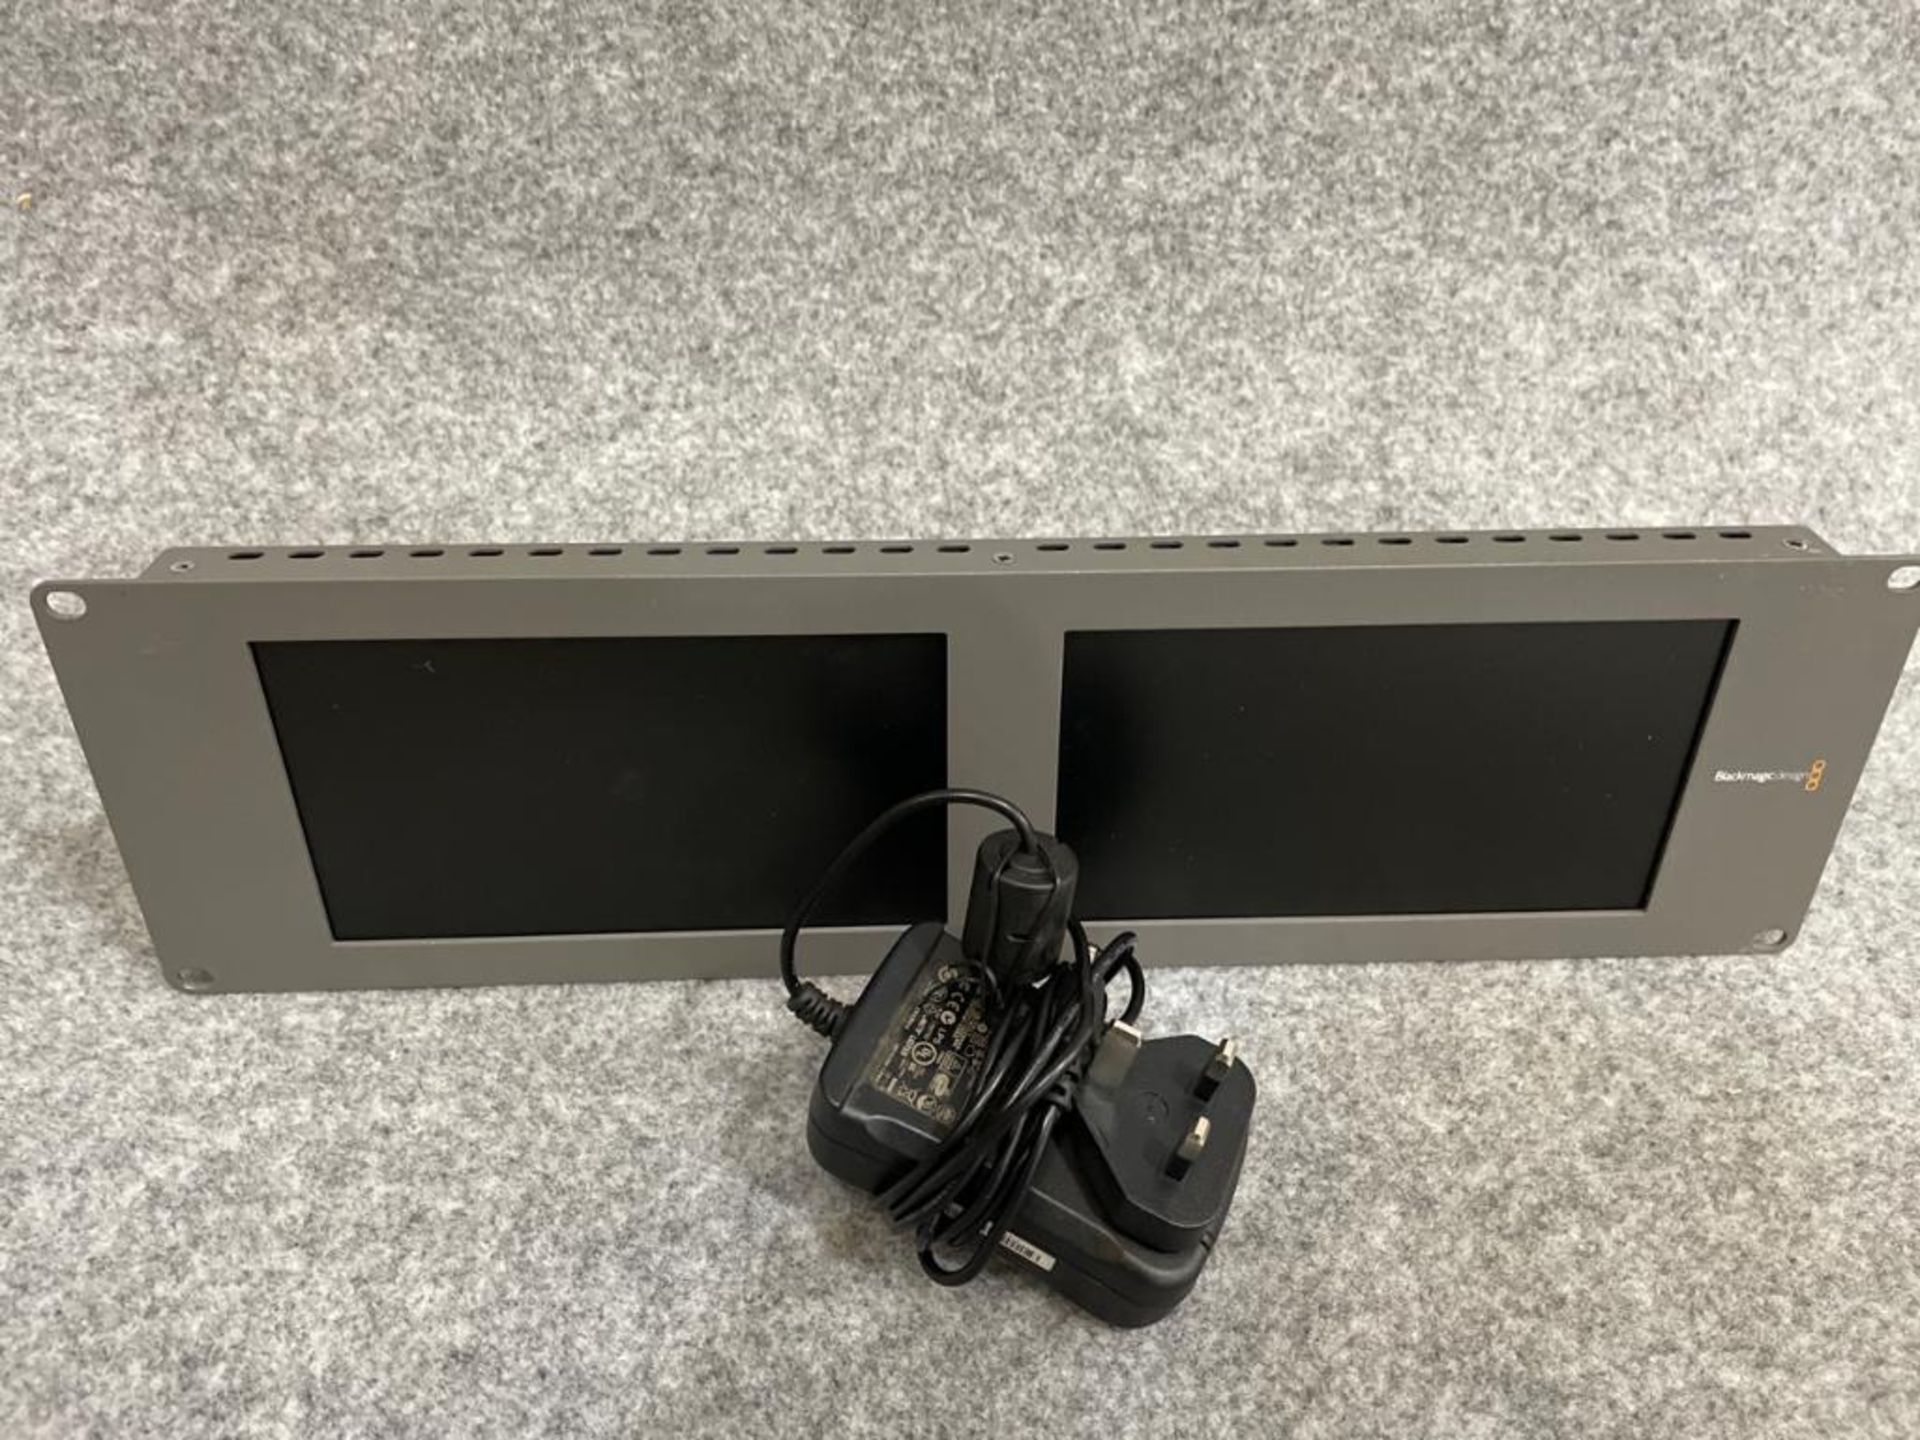 BlackMagic Dual HD Monitor with power supply SN: 1391896 - Image 3 of 3